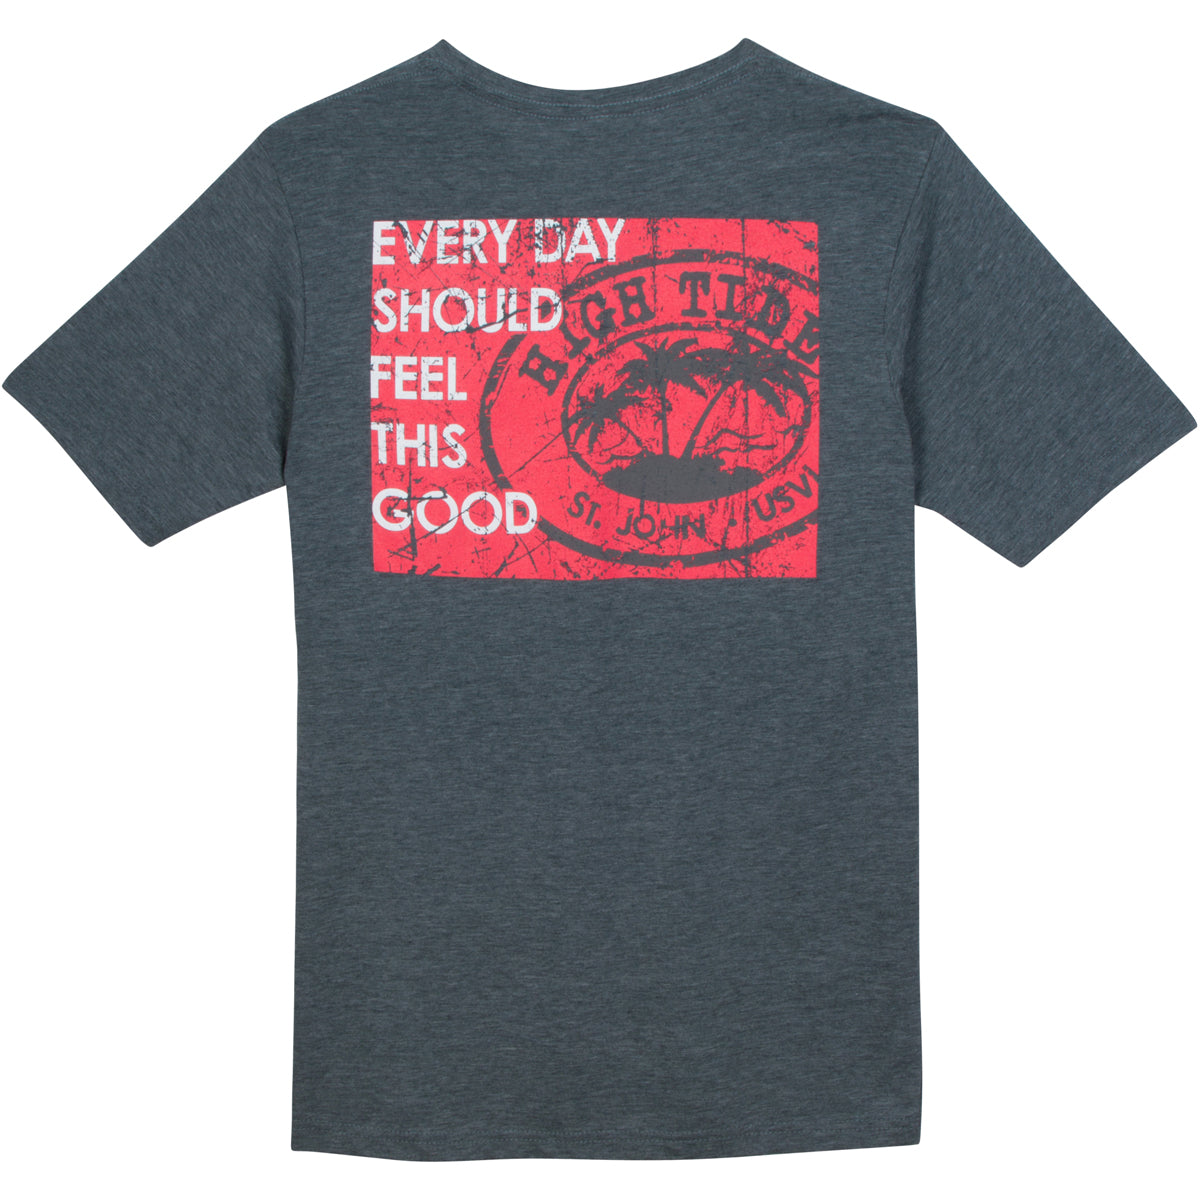 EVERY DAY SHOULD FEEL THIS GOOD T-SHIRT